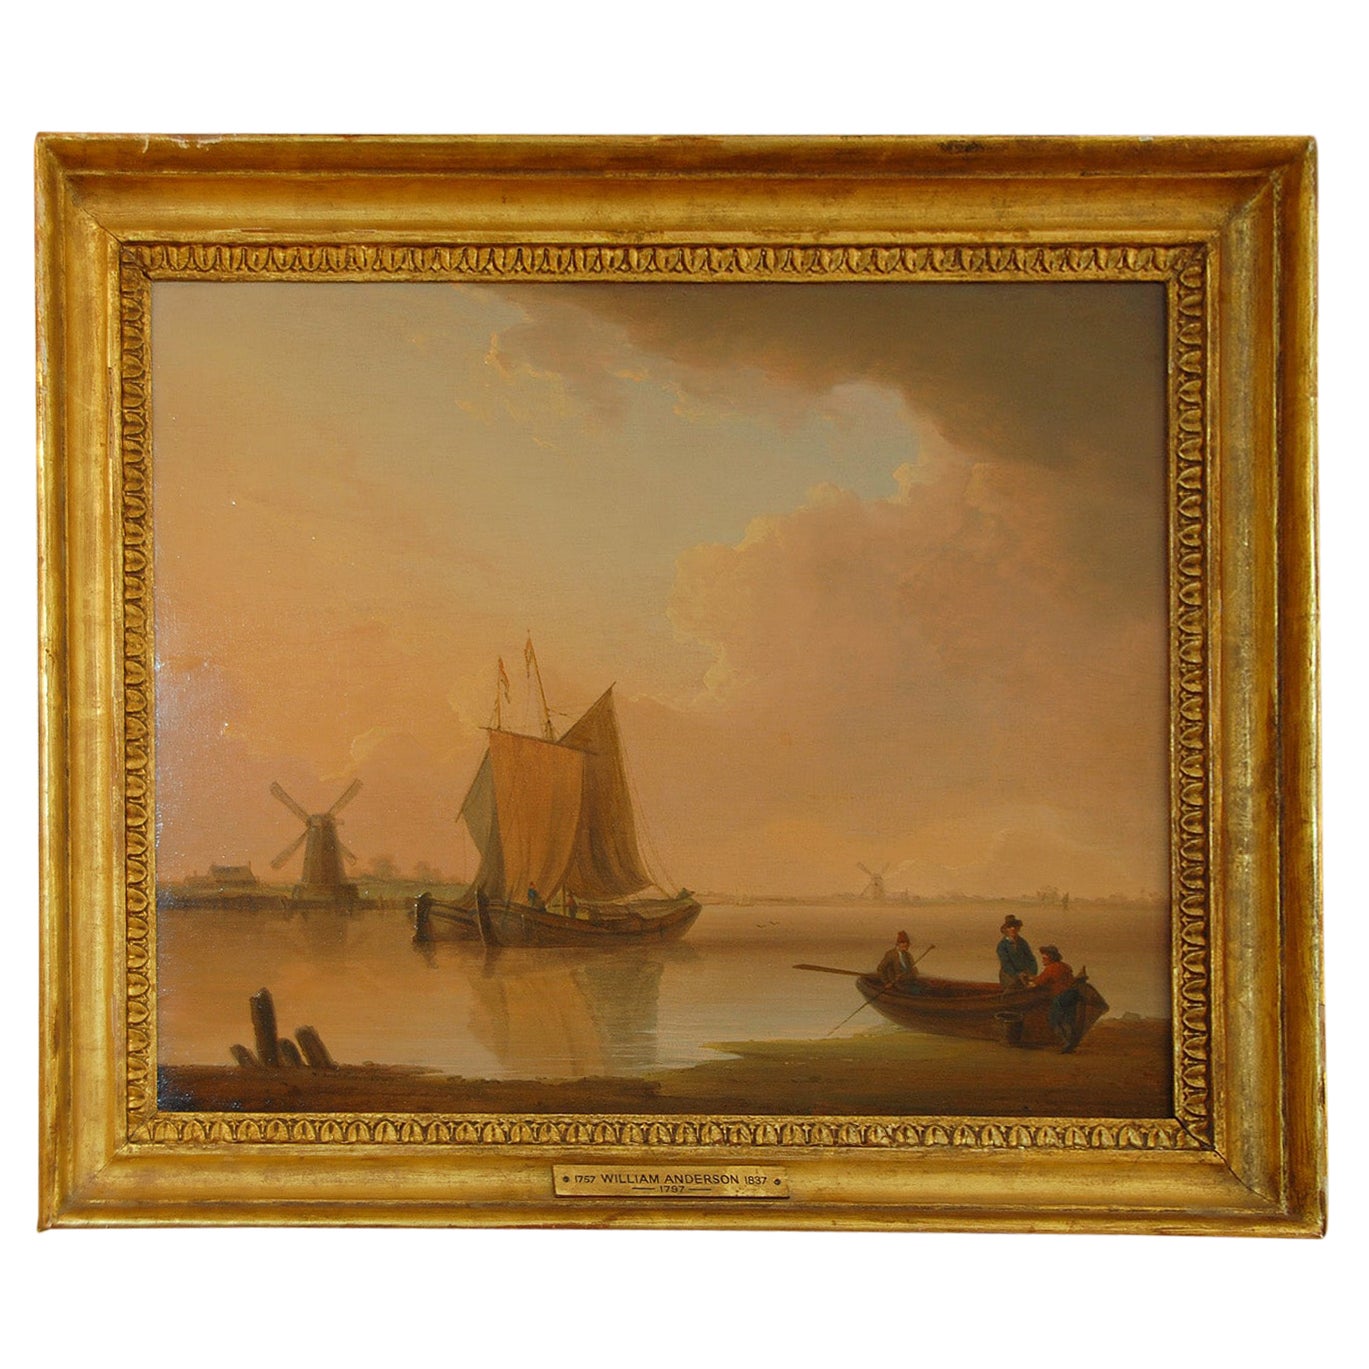 English Maritime Original Oil on Board Signed William Anderson Dated 1797